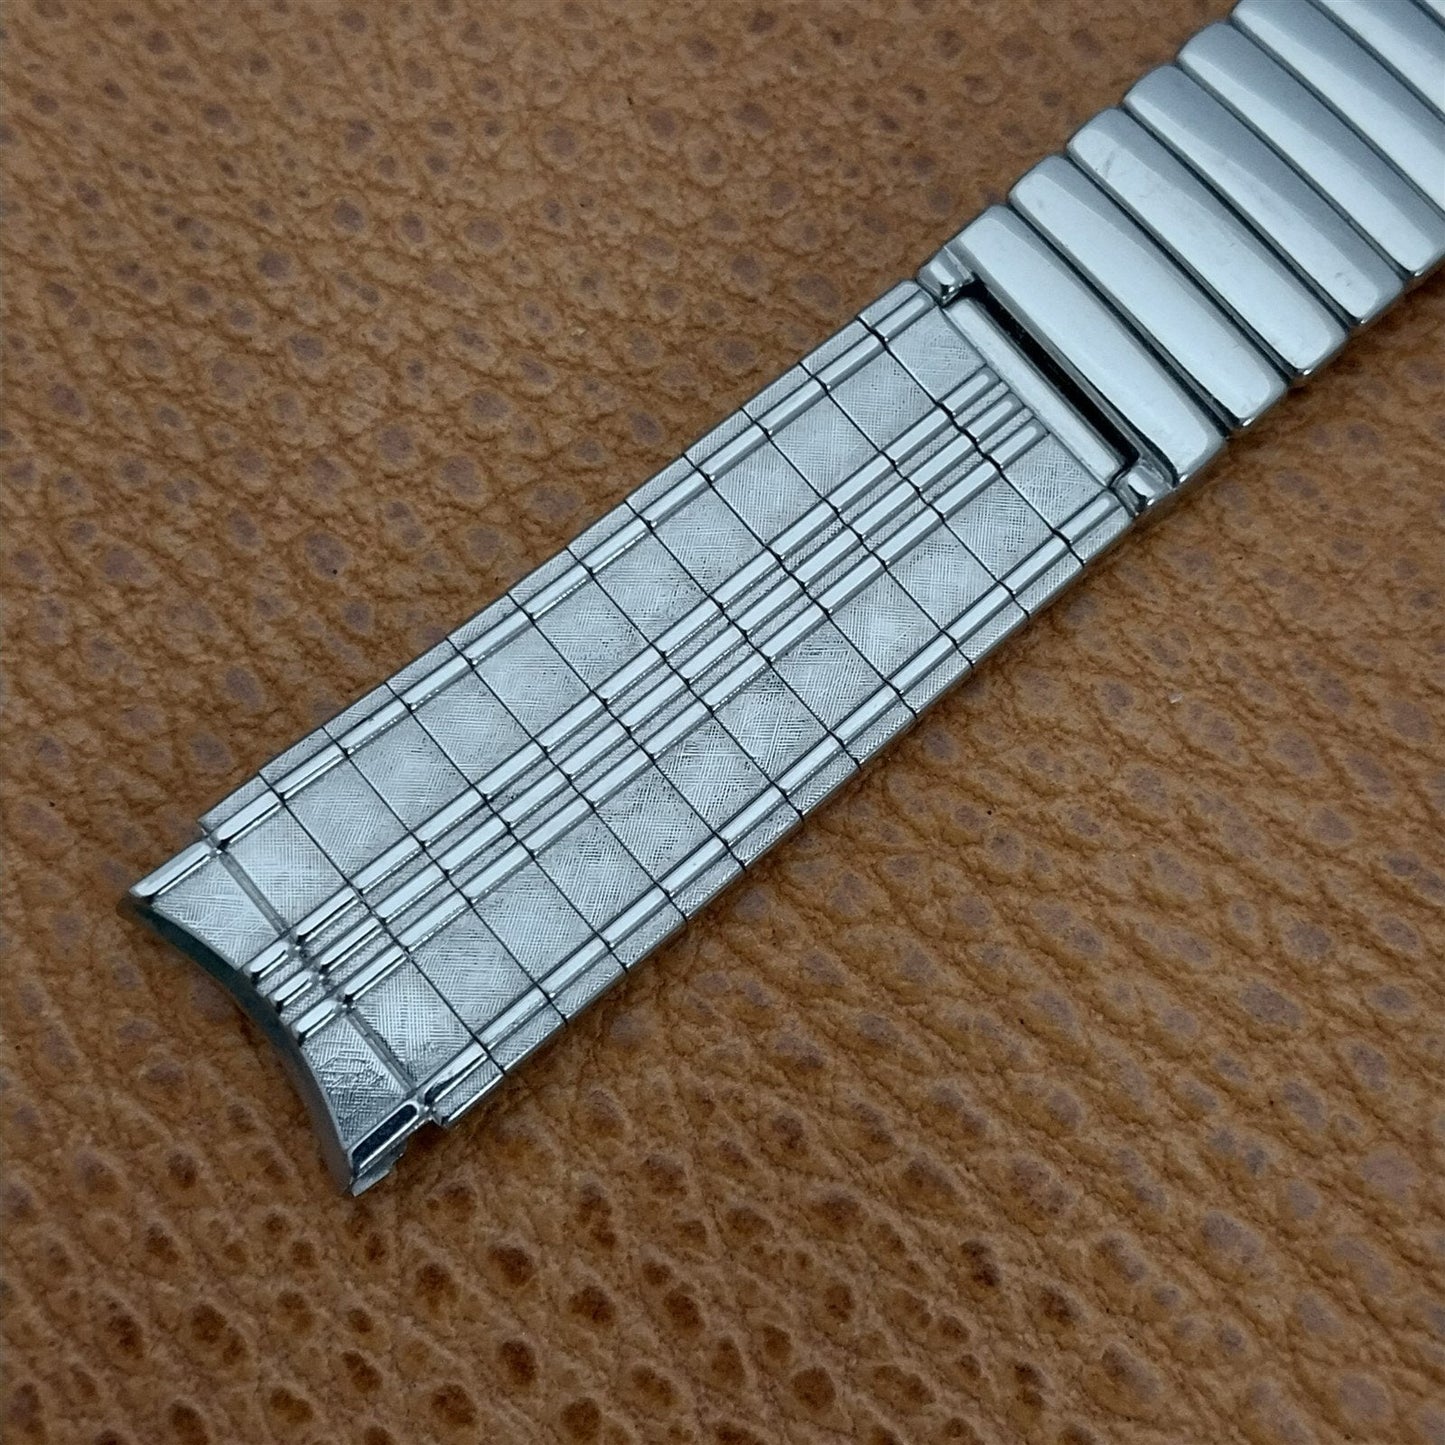 5/8" JB Champion Vintage Stainless Steel Unused Classic 1960s Watch Band